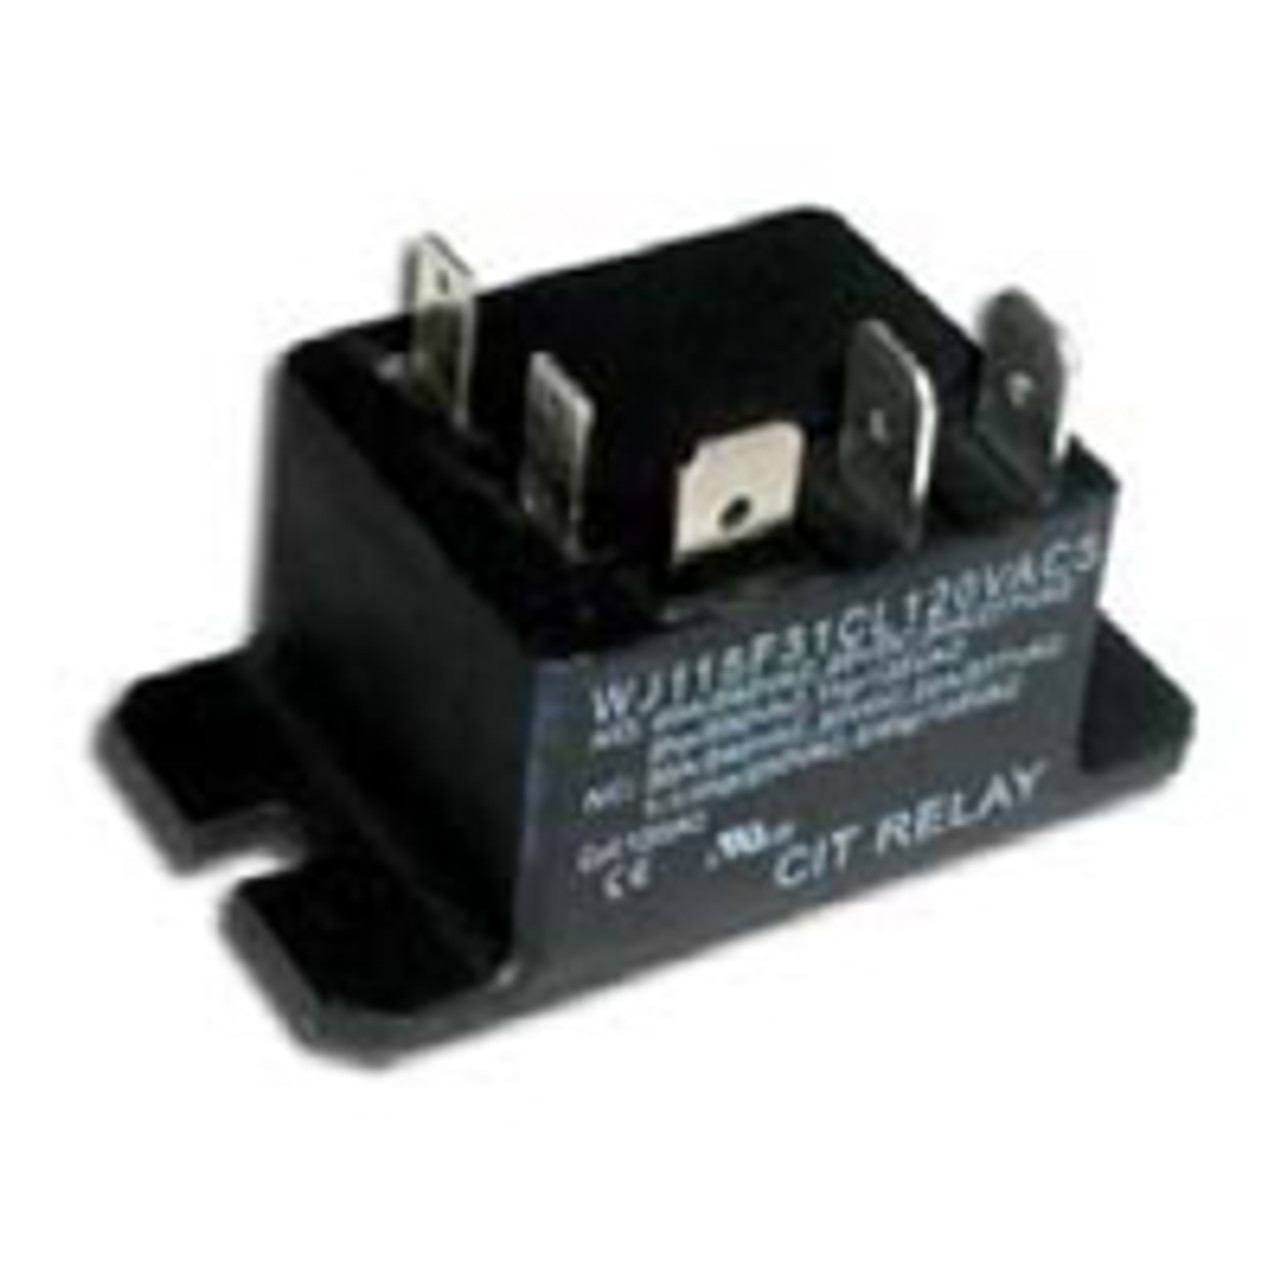 CIT Relay and Switch J115F31CL120VACS Power Relays